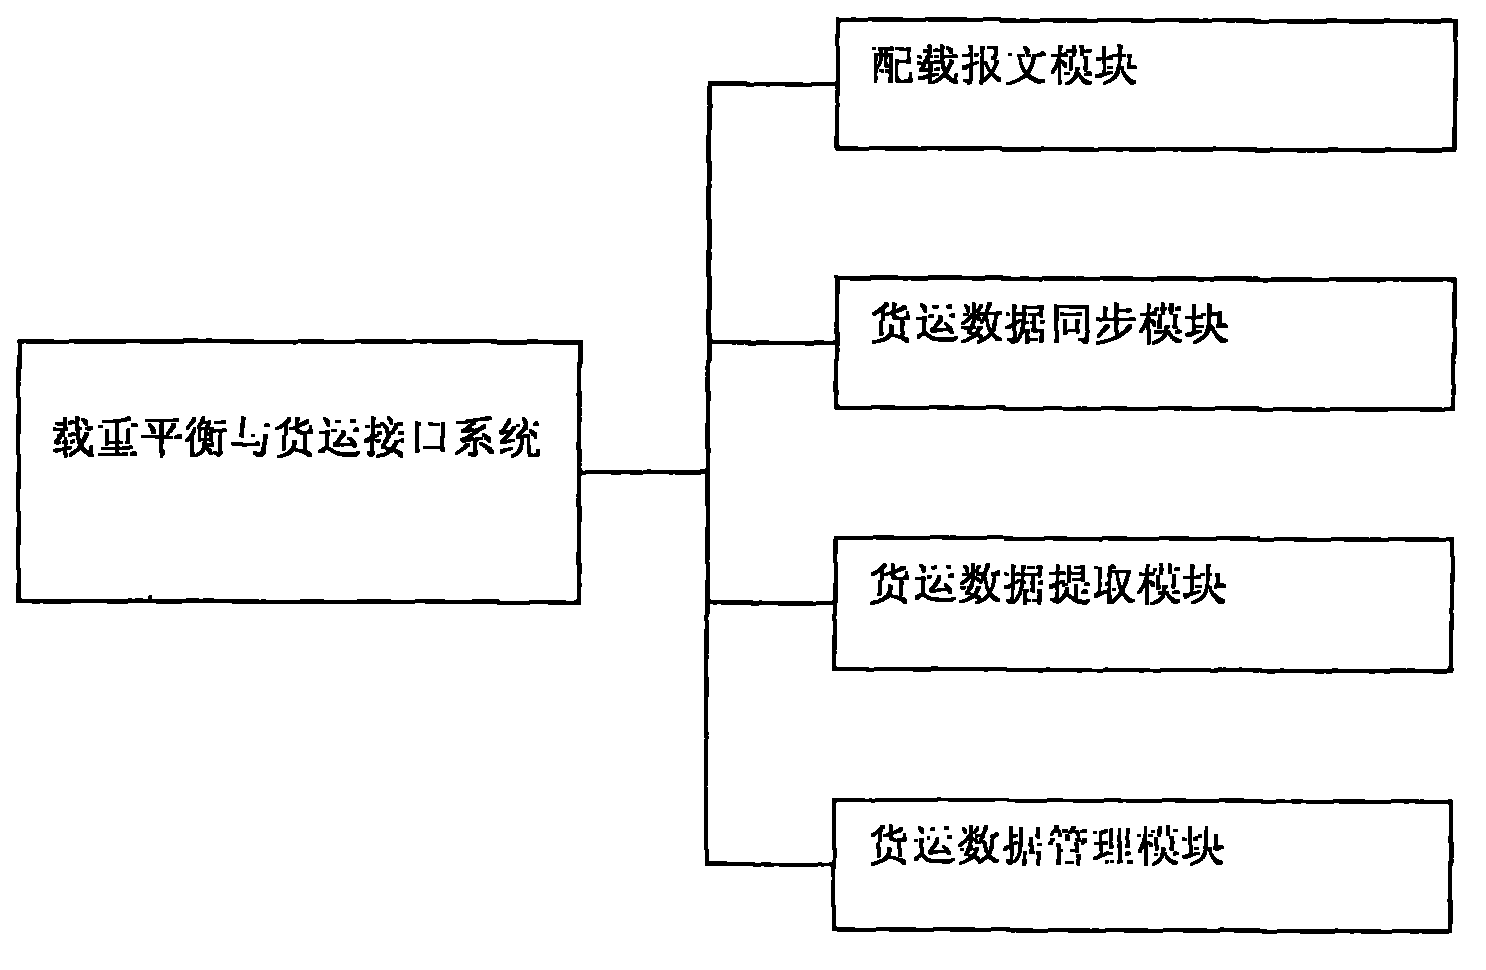 Load balance and freight interface system